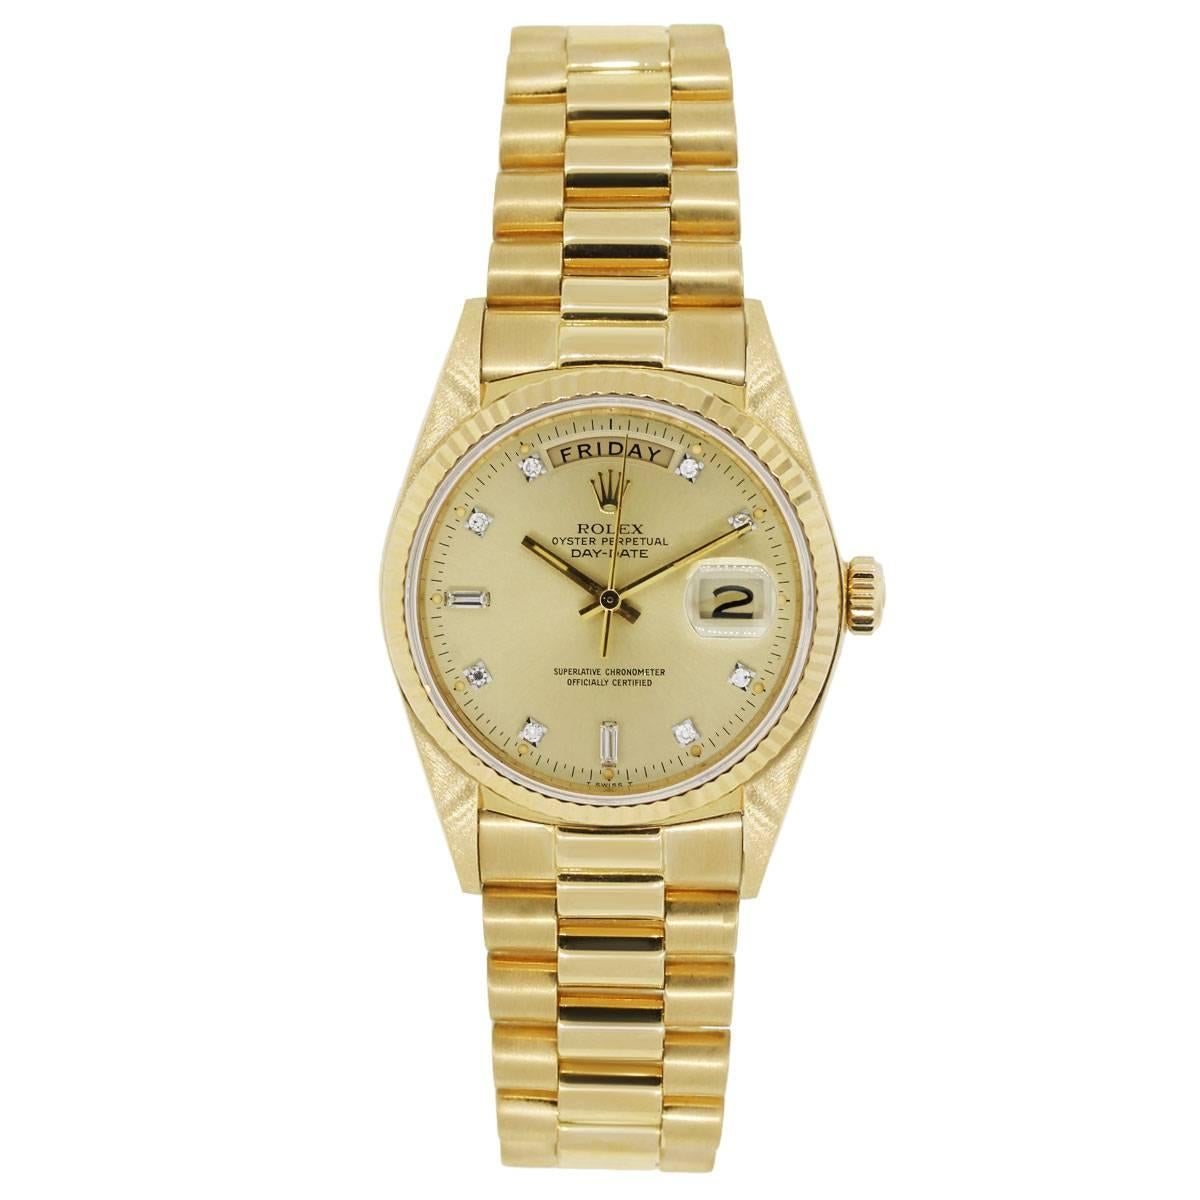 Brand: Rolex
MPN: 18038
Model: Day Date
Case Material: 18k yellow gold
Case Diameter: 36mm
Crystal: Original Rolex Sapphire Crystal
Bezel: 18k yellow gold fluted bezel (factory)
Dial: Champagne diamond dial (aftermarket)
Bracelet: 18k yellow gold